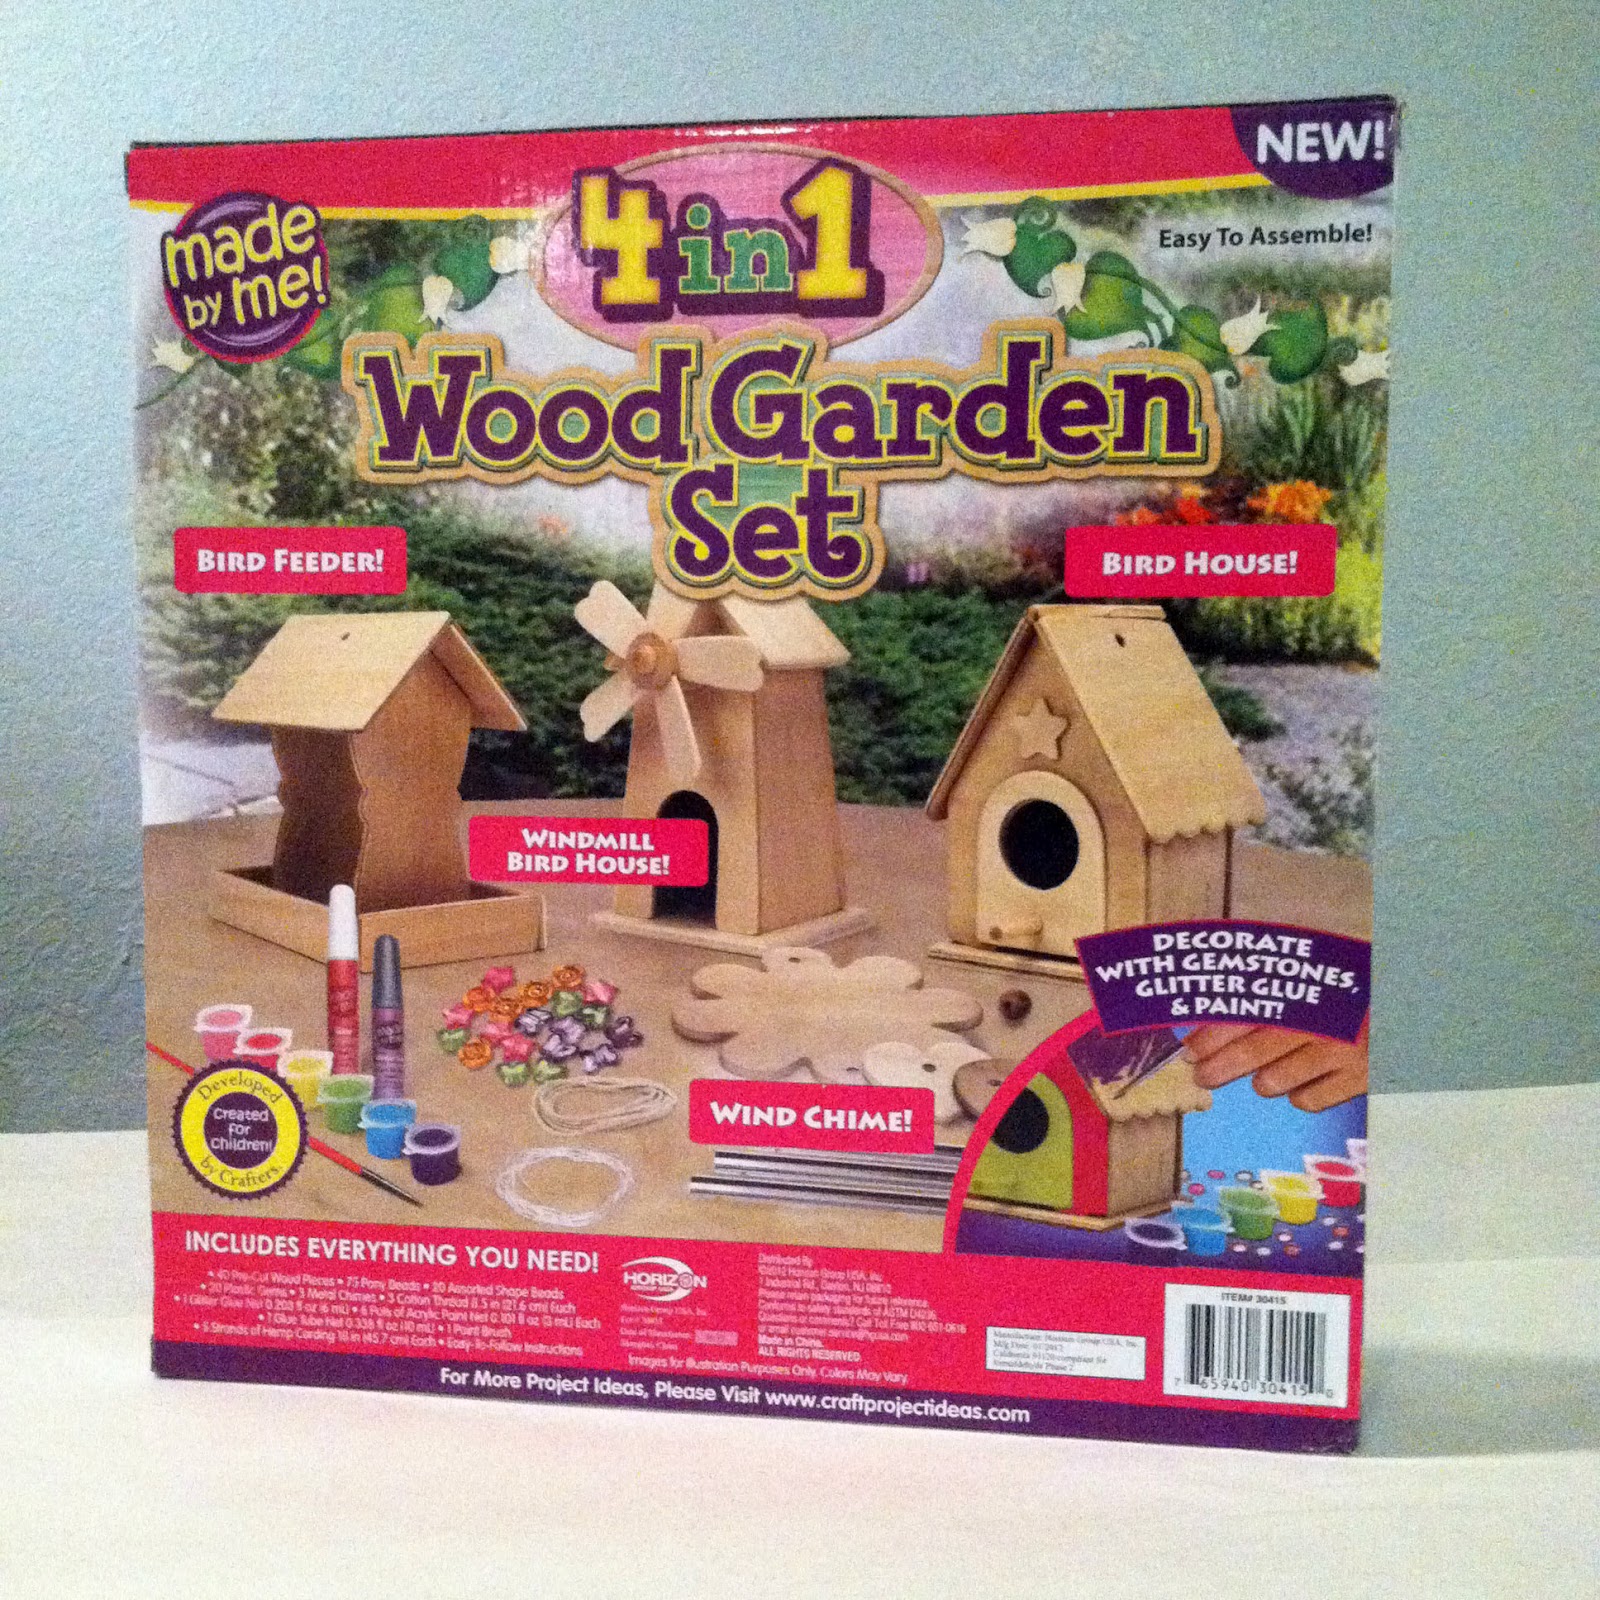 Best Source For Woodworking Plans: Woodwork Kits Kids Wooden Plans